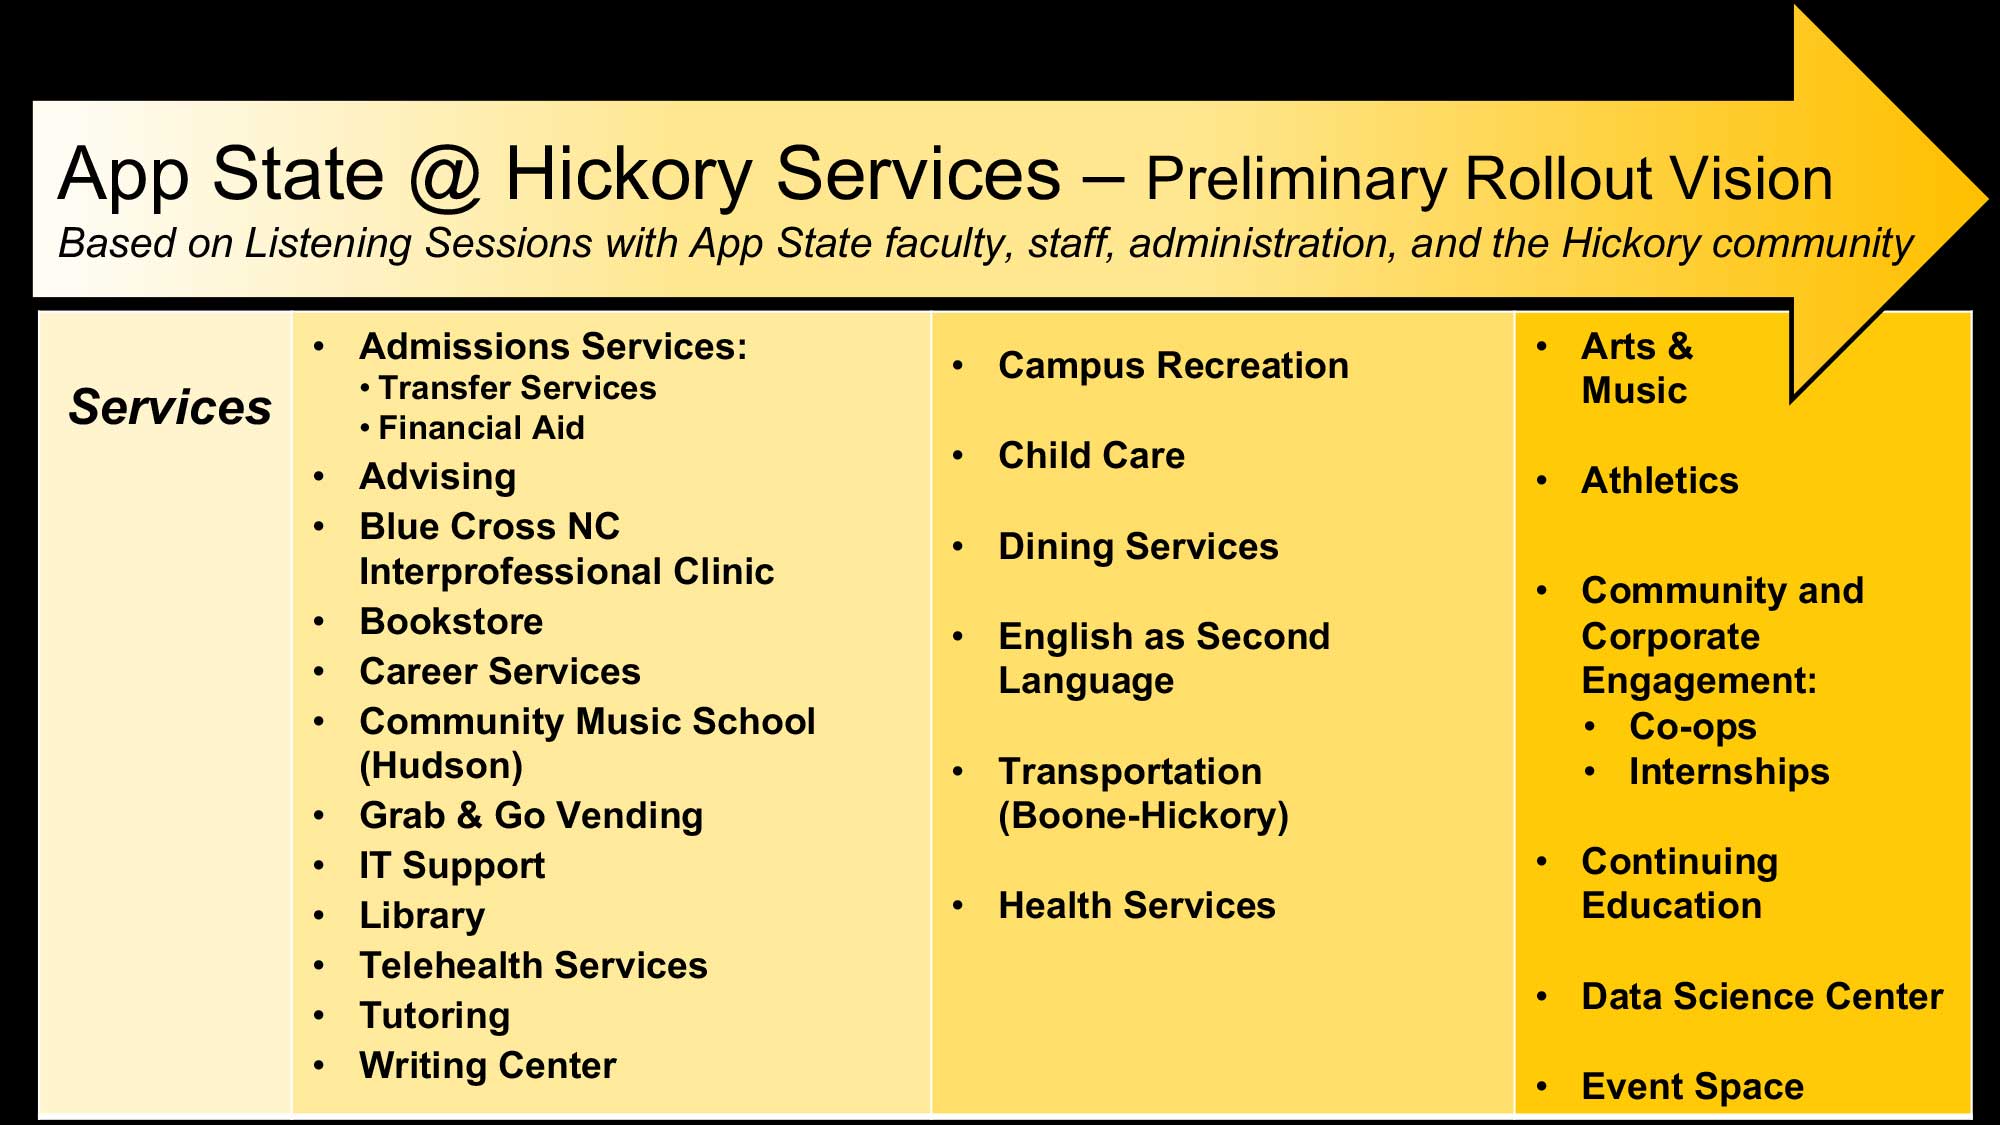 App State at Hickory Services Preliminary Rollout Vision Based on Listening Sessions with App State faculty, staff, administration, and the Hickory community. Service Offerings: Admissions Services including Transfer Services and Financial Aid. Advising, Blue Cross NC, Interprofessional Clinic, Bookstore, Career Services, Community Music School (Hudson), Grab and Go Vending, IT Support, Library, Telehealth Services, Tutoring and Writing Center, Campus Recreation, Child Care, Dining Services, English as Second Language, Transportation (Boone-Hickory), Health Services, Arts and Music, and Athletics. Community and Corporate Engagement including Co-ops and Internships. Continuing Education, Data Science Center and Event Space.